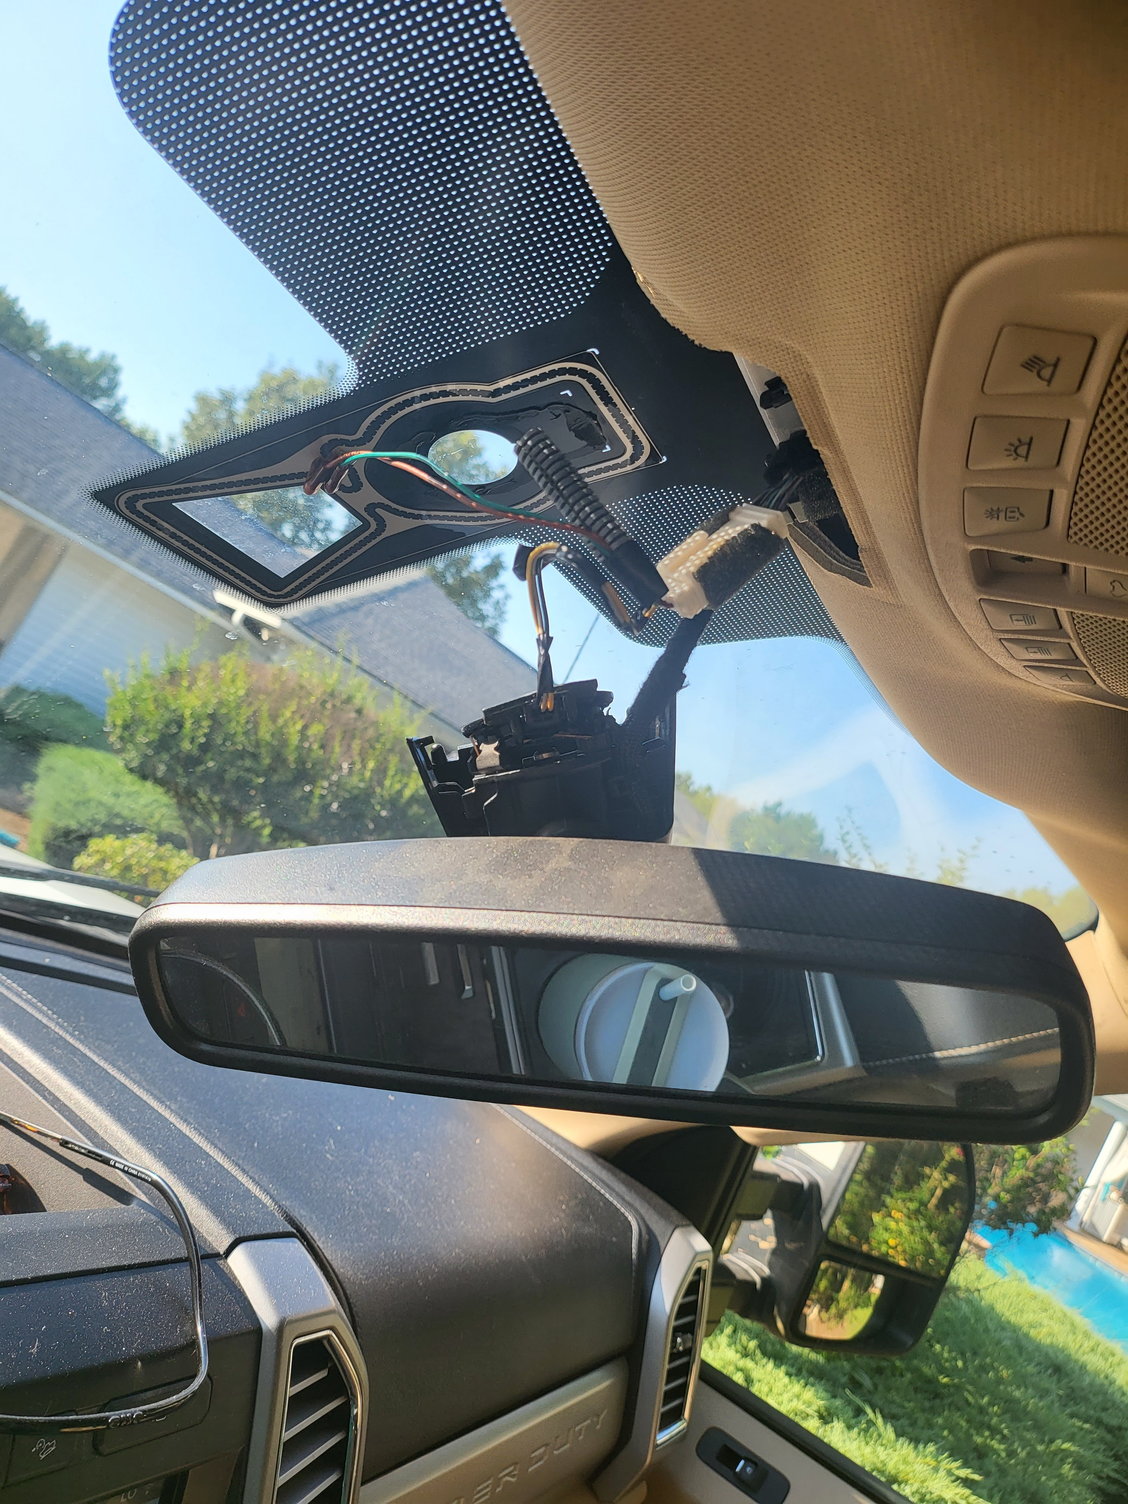 Rear view mirror repair question - The Hull Truth - Boating and